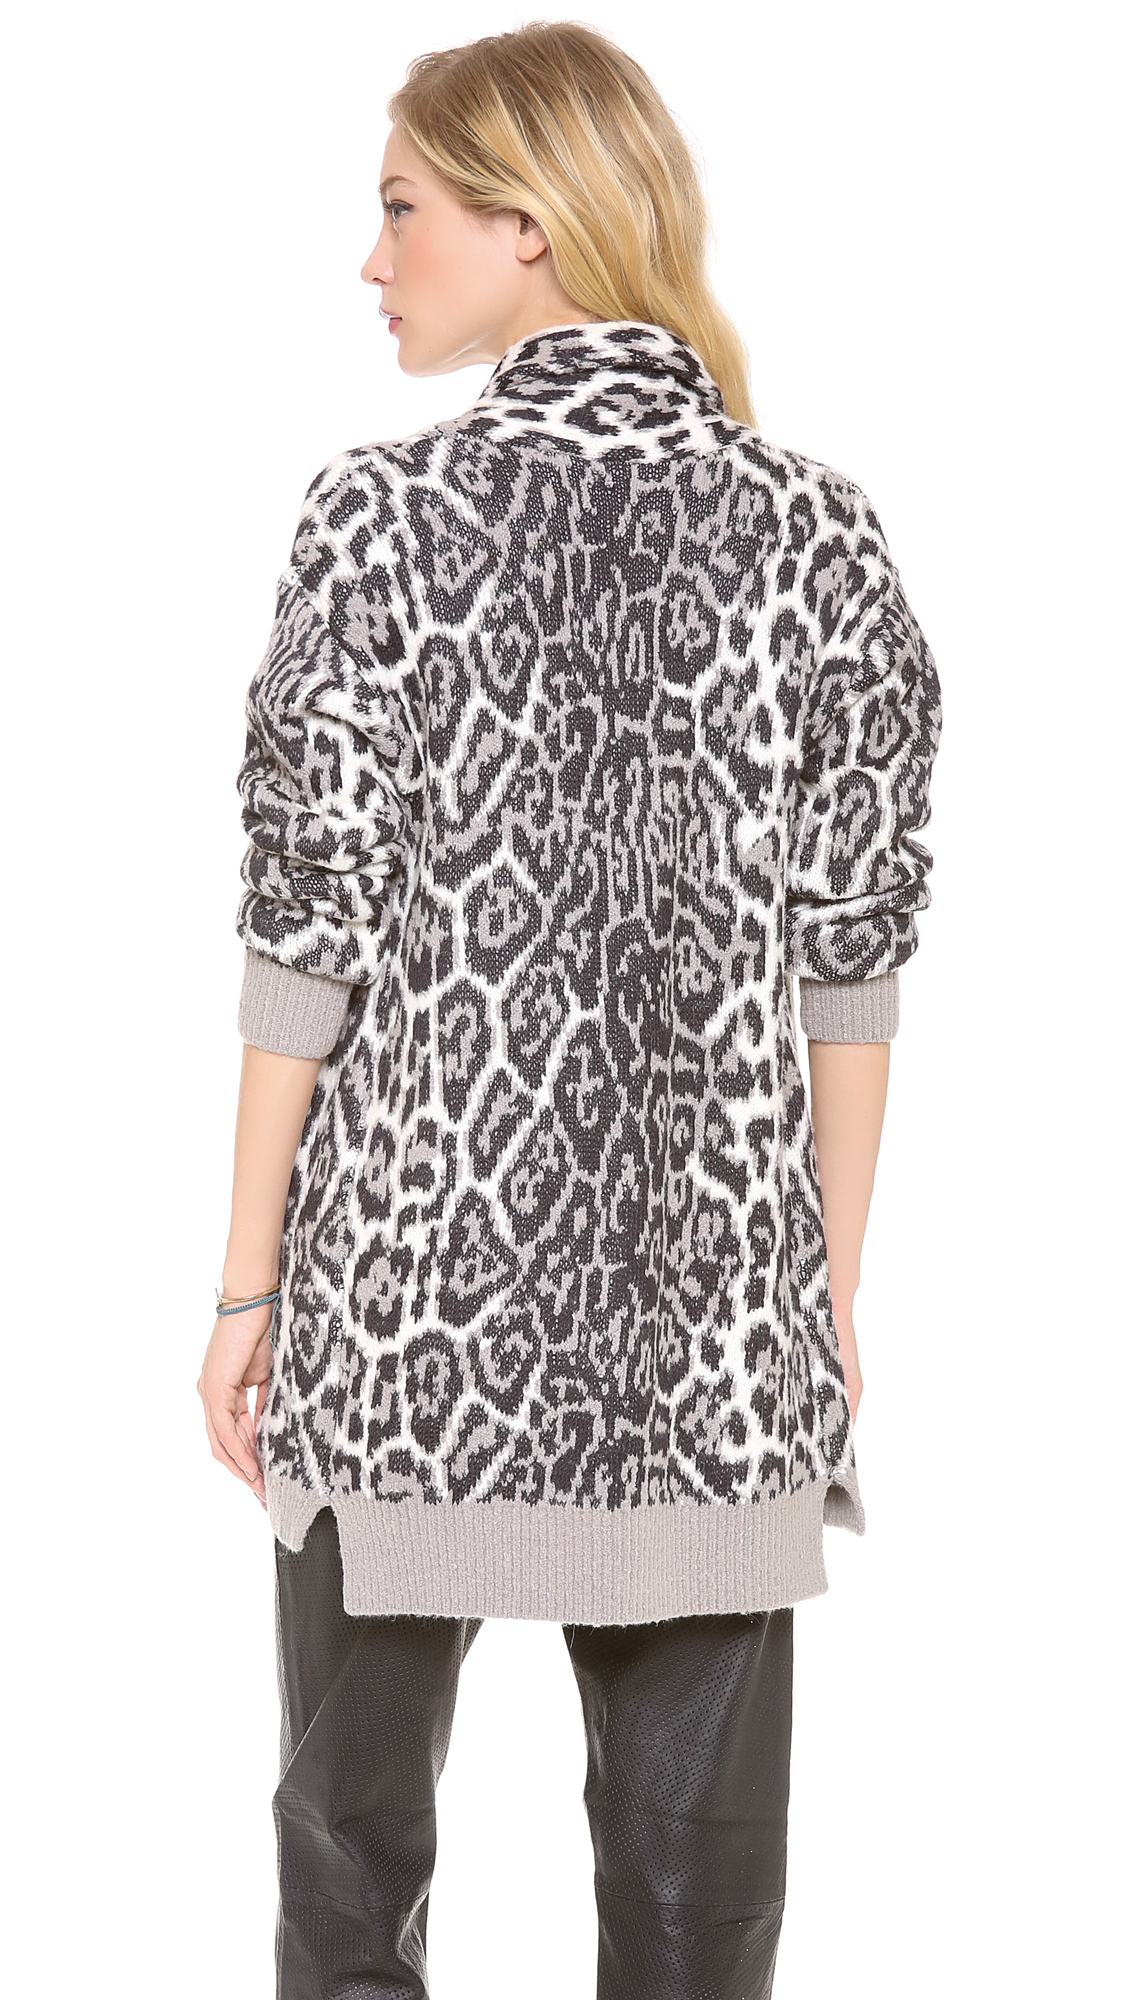 Lyst - Juicy Couture Wild Lynx Jacquard Cardigan in Black